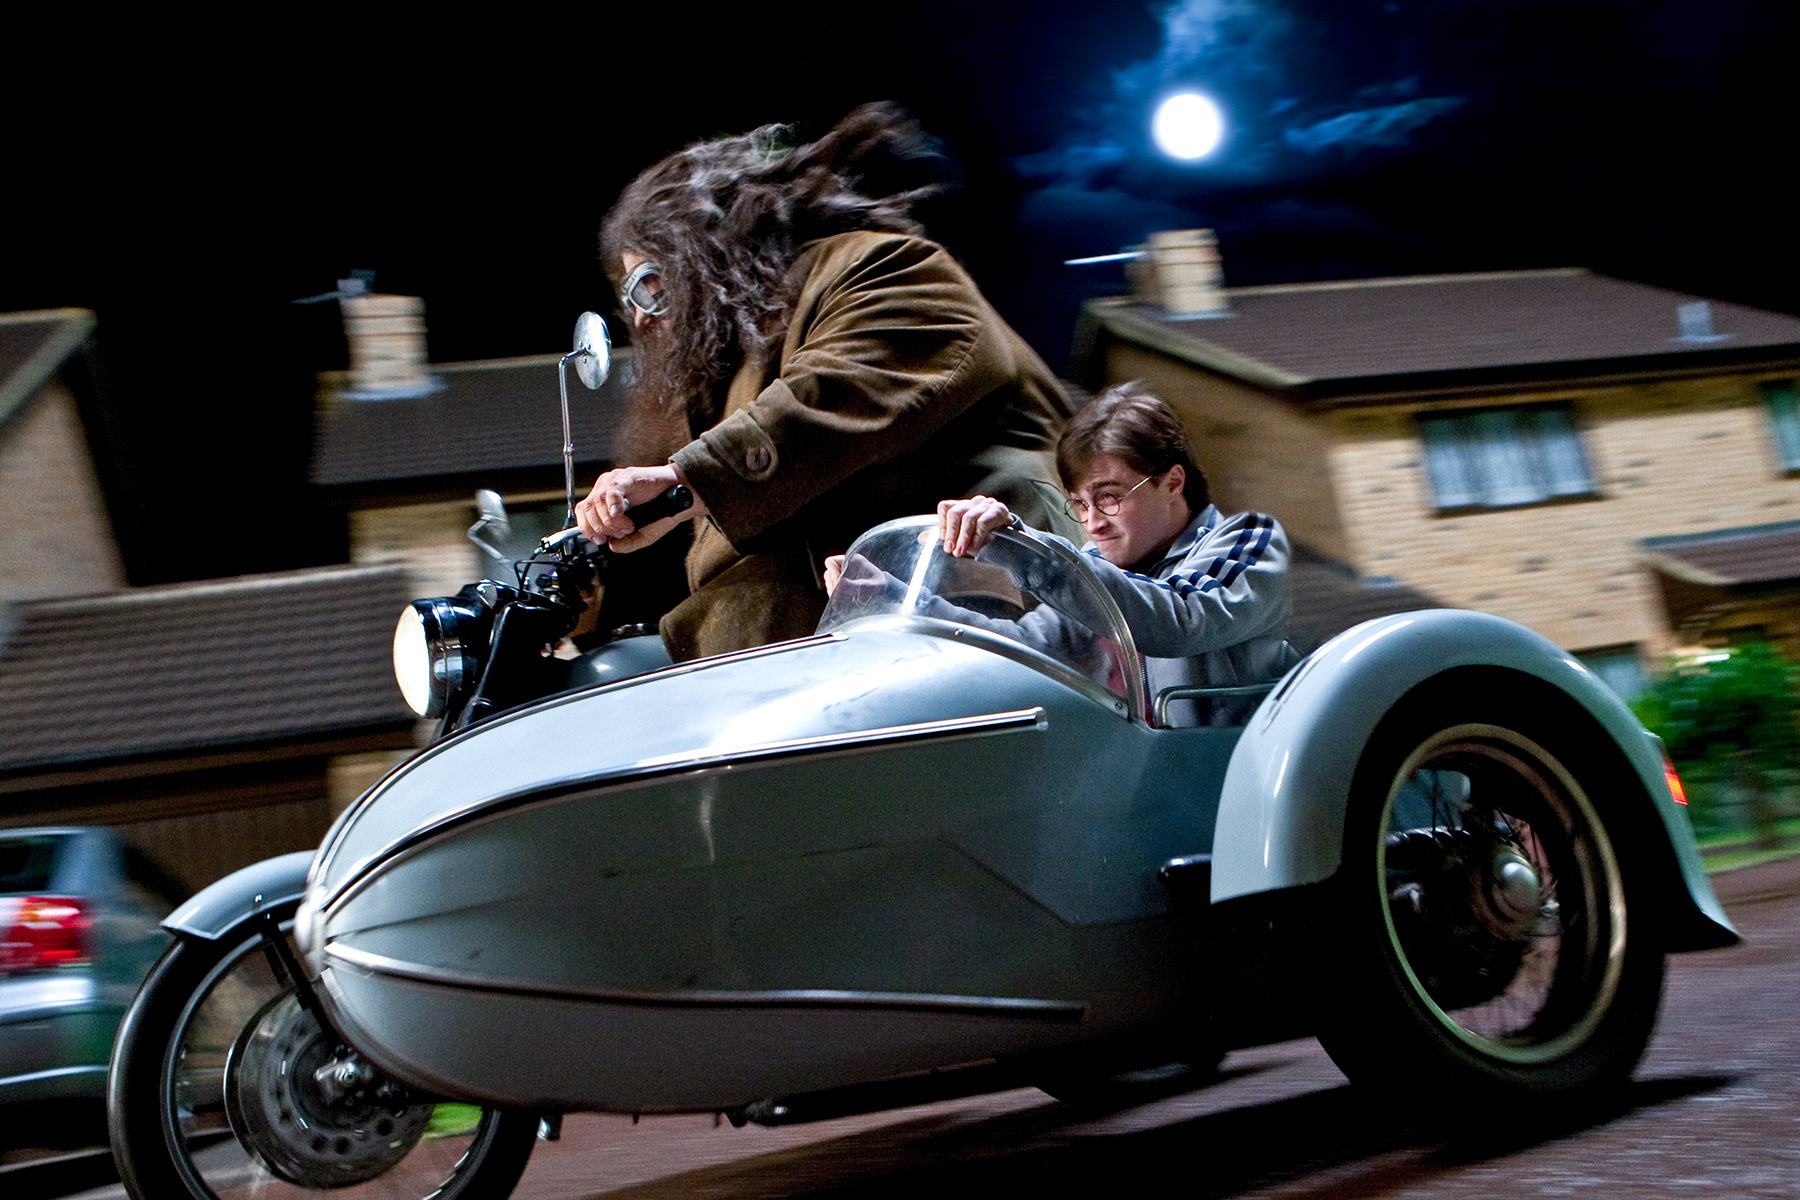 Everyone mounts up and leaves Privet Drive. Harry and Hagrid (Greg Powell) take the bike. (SC22)